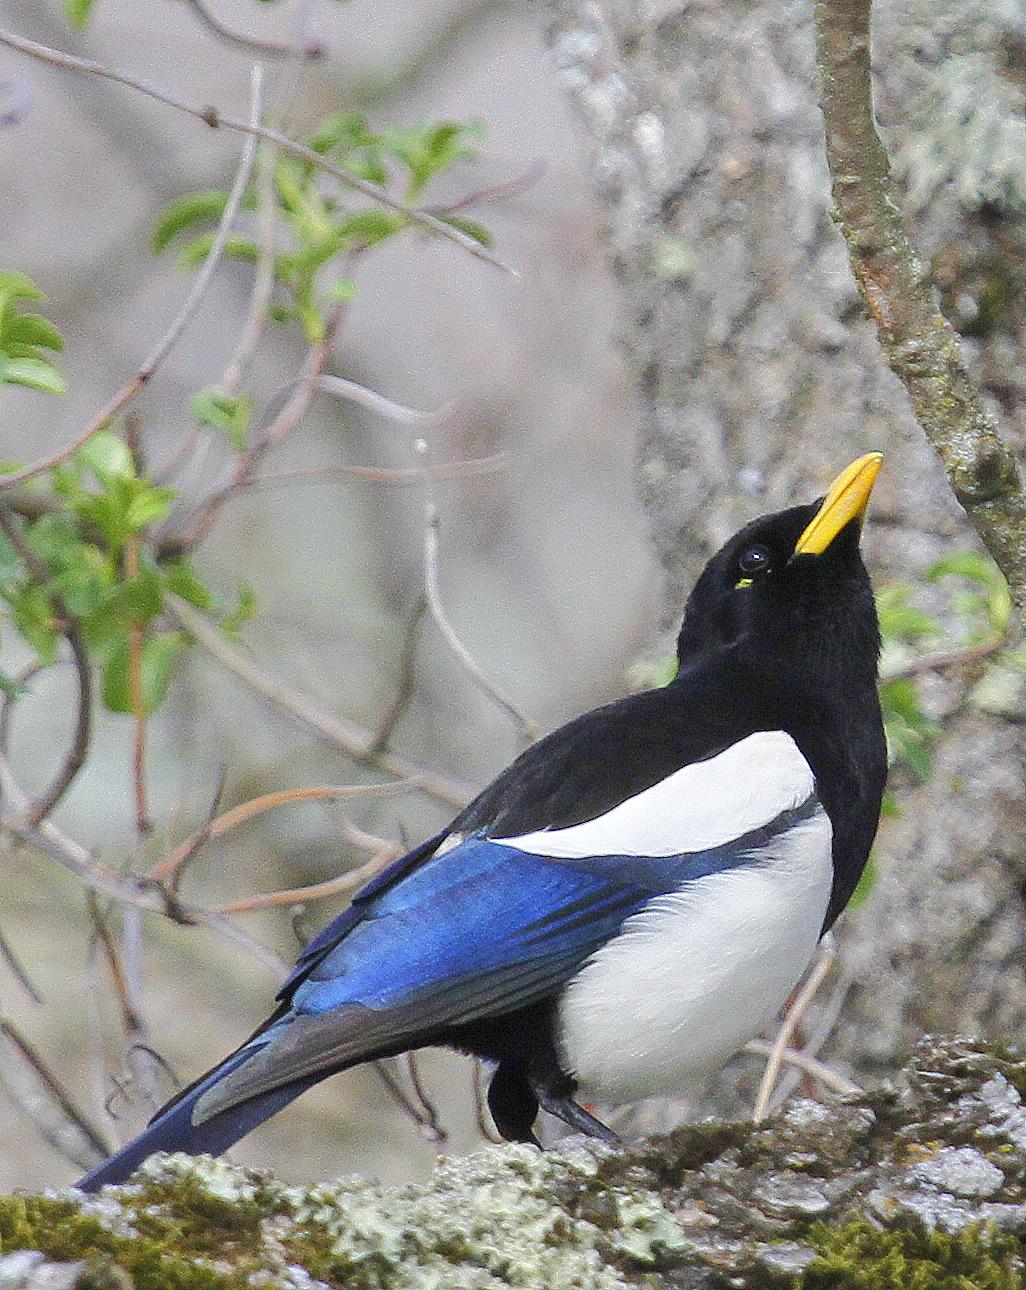 Yellow-billed Magpie Photo by Isaac Sanchez